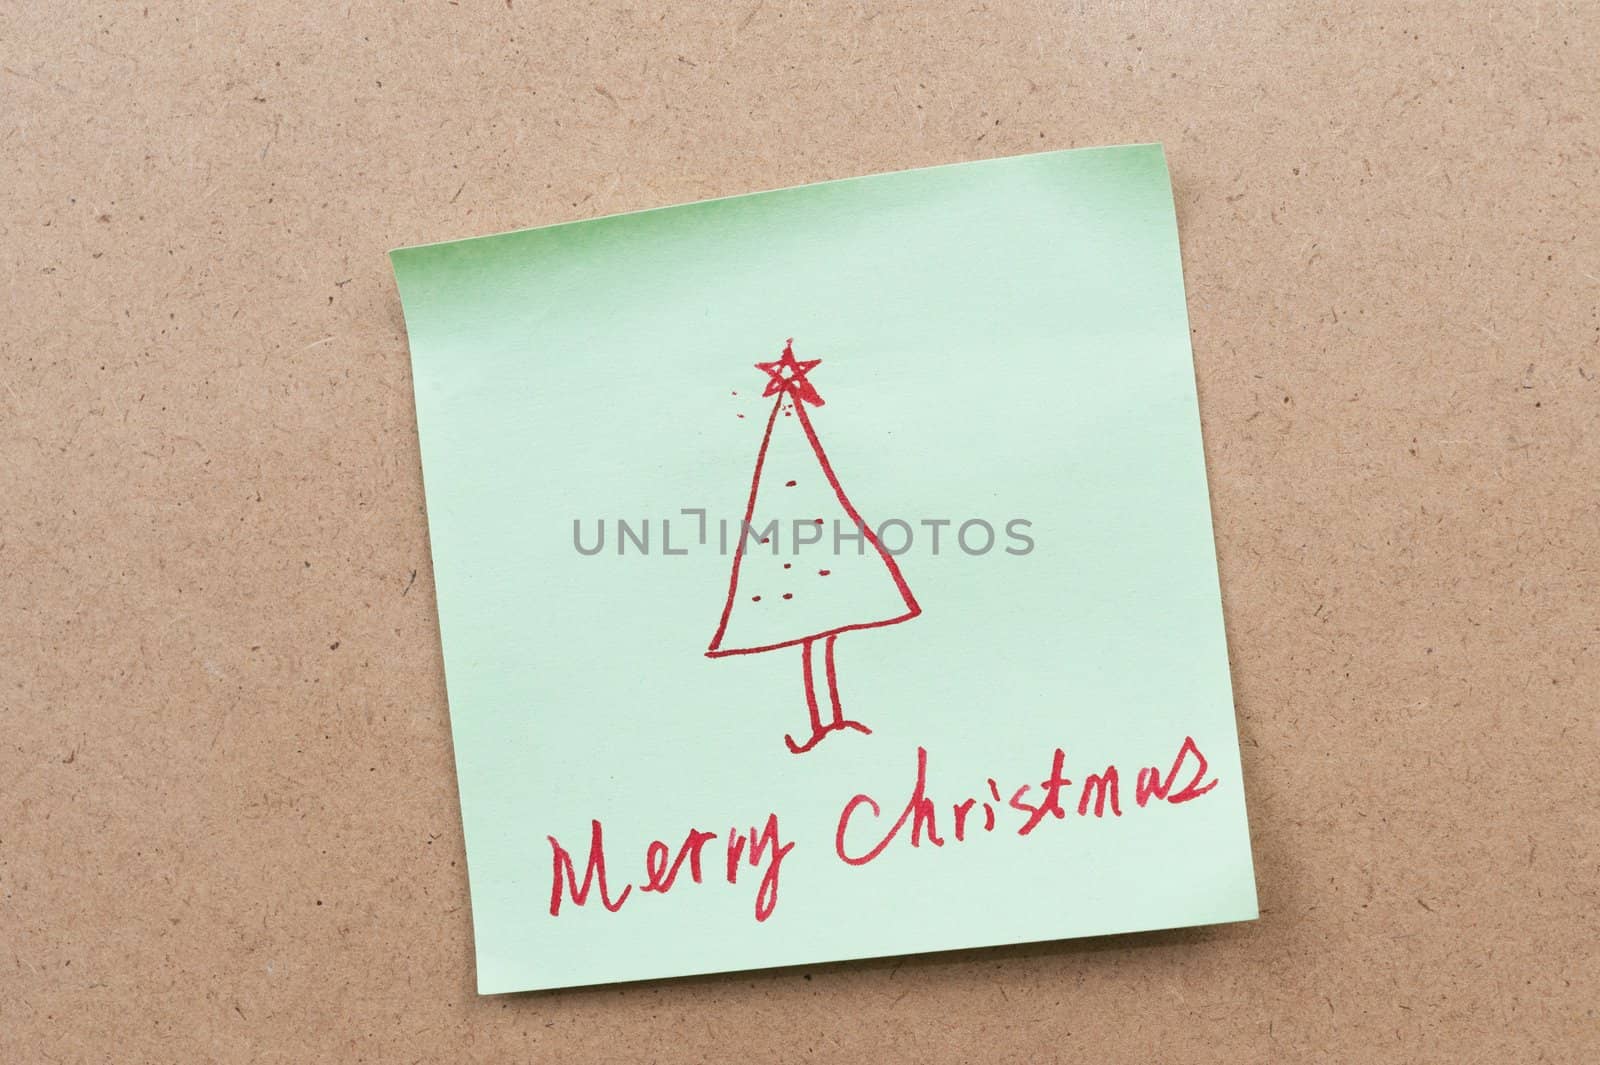 Merry Christmas words written on a sticky note